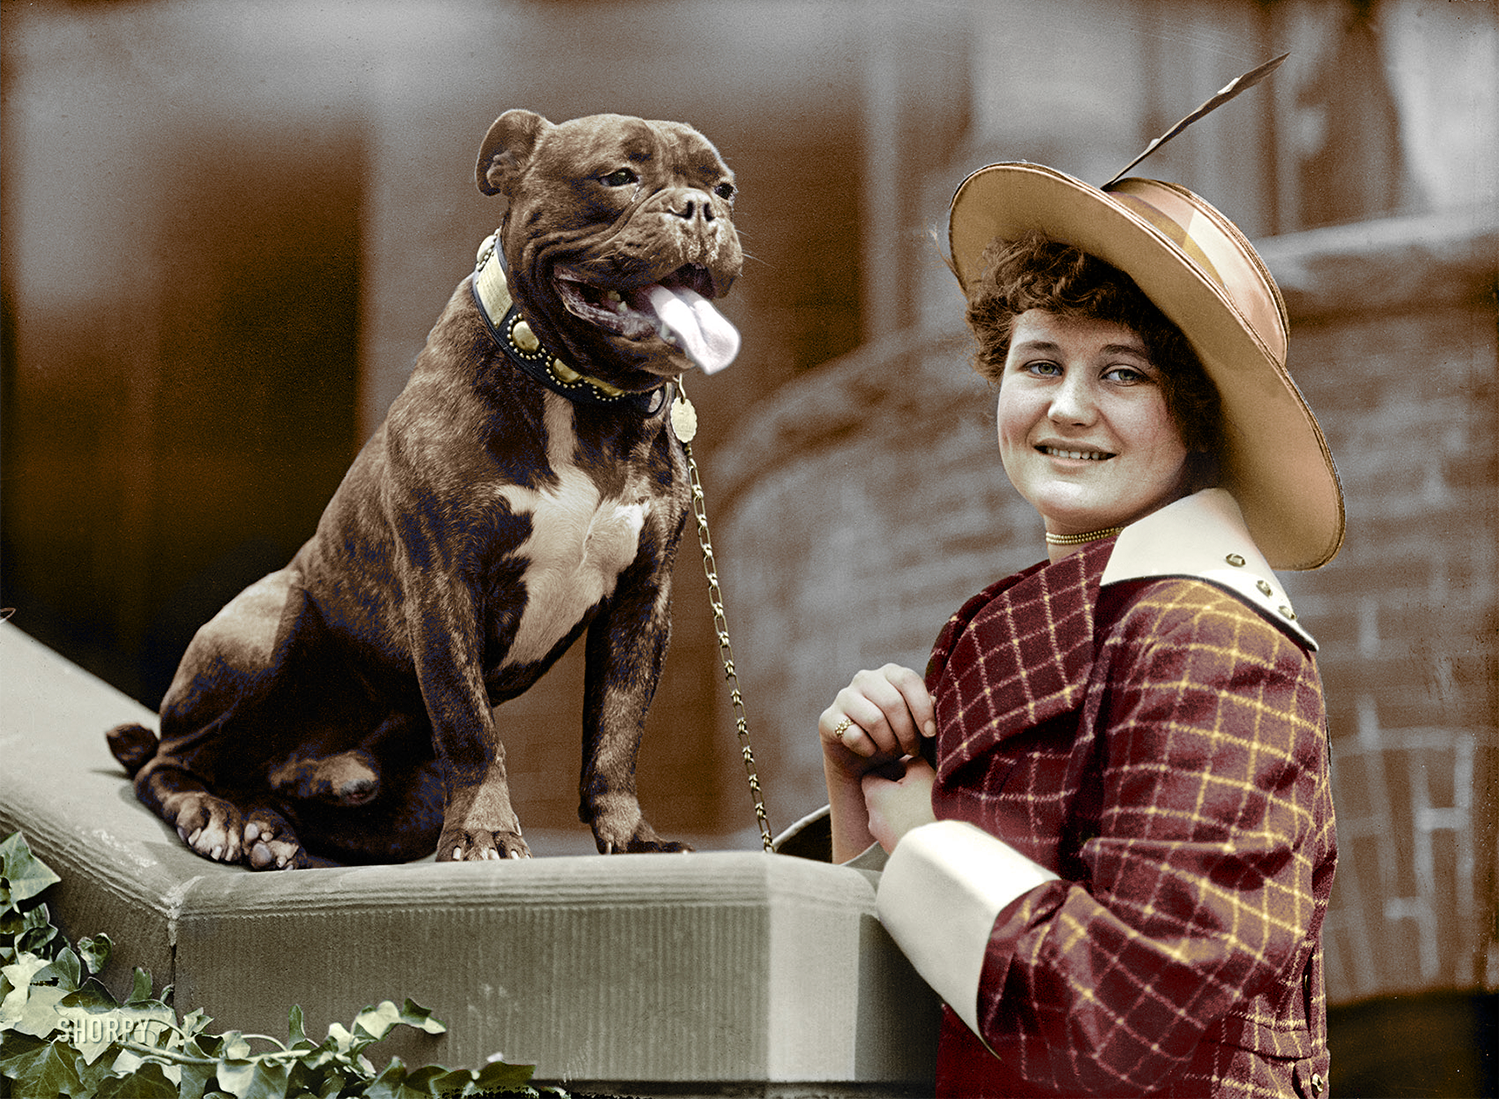 Miss Edith Gracie and Friend